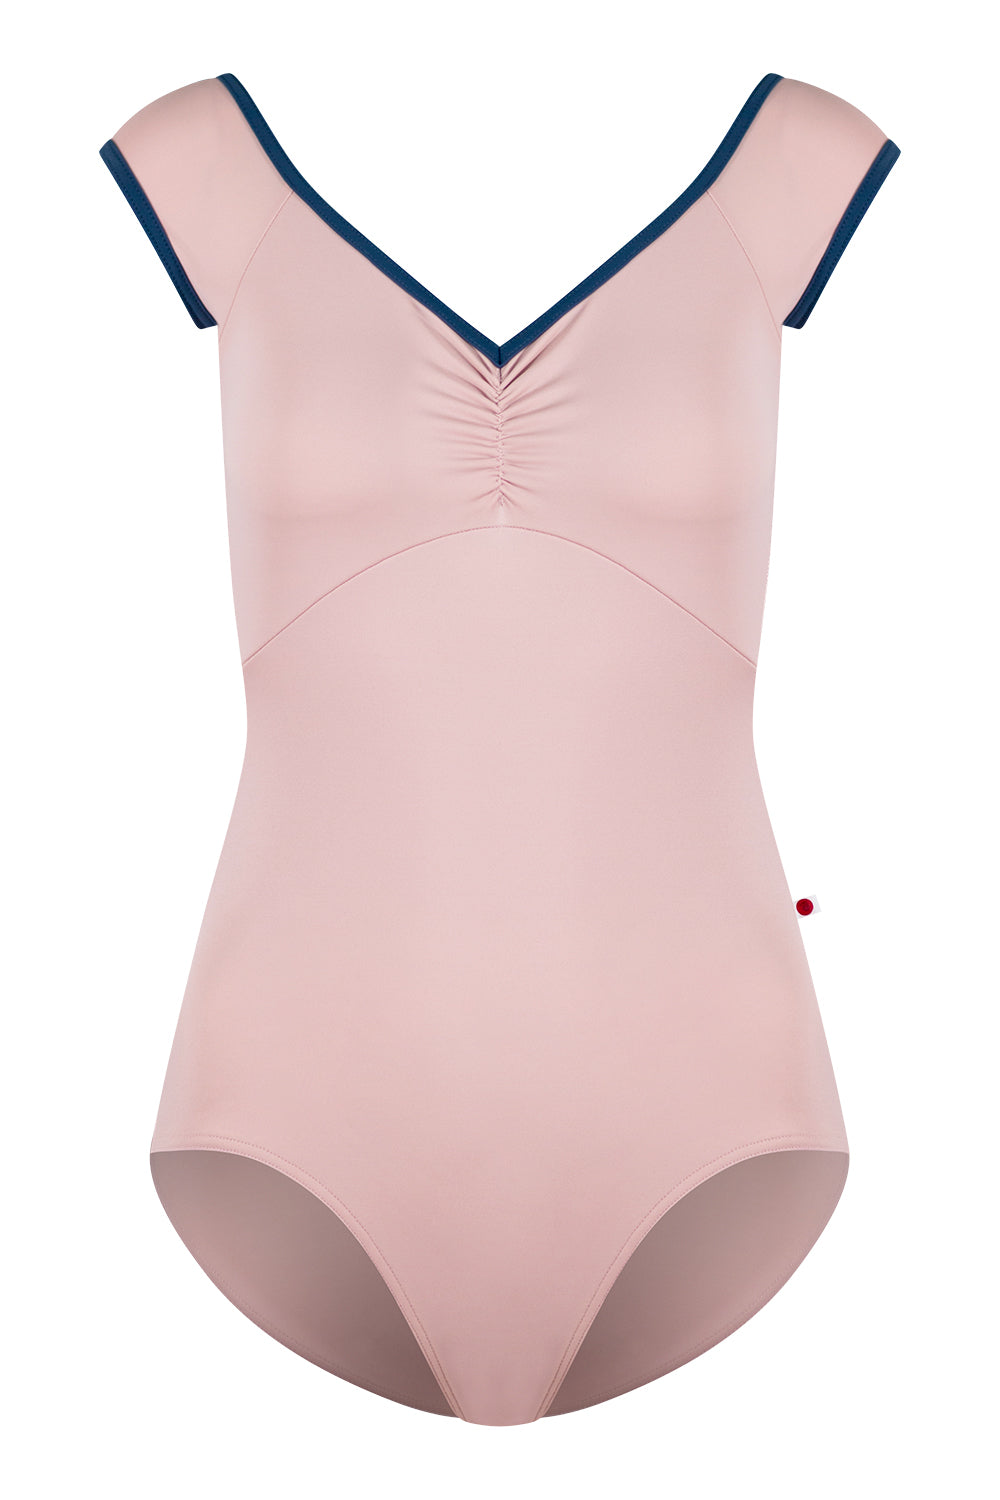 Elli leotard in T-Petal body and top color with T-Storm trim color